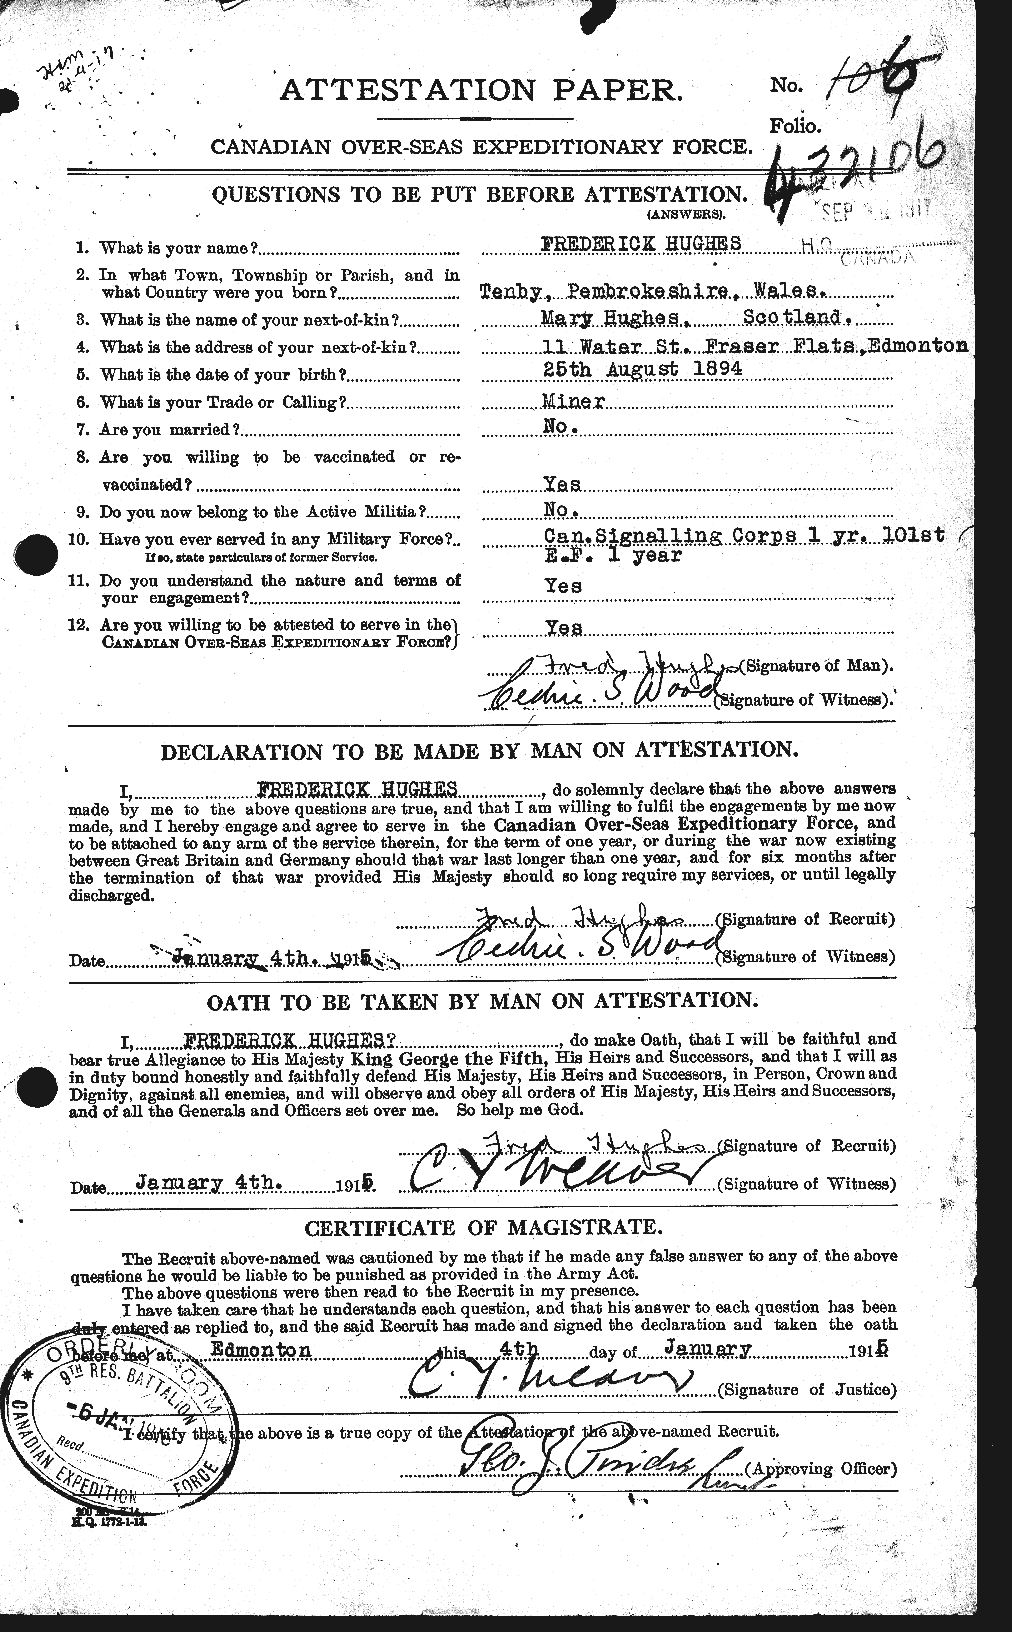 Personnel Records of the First World War - CEF 403791a